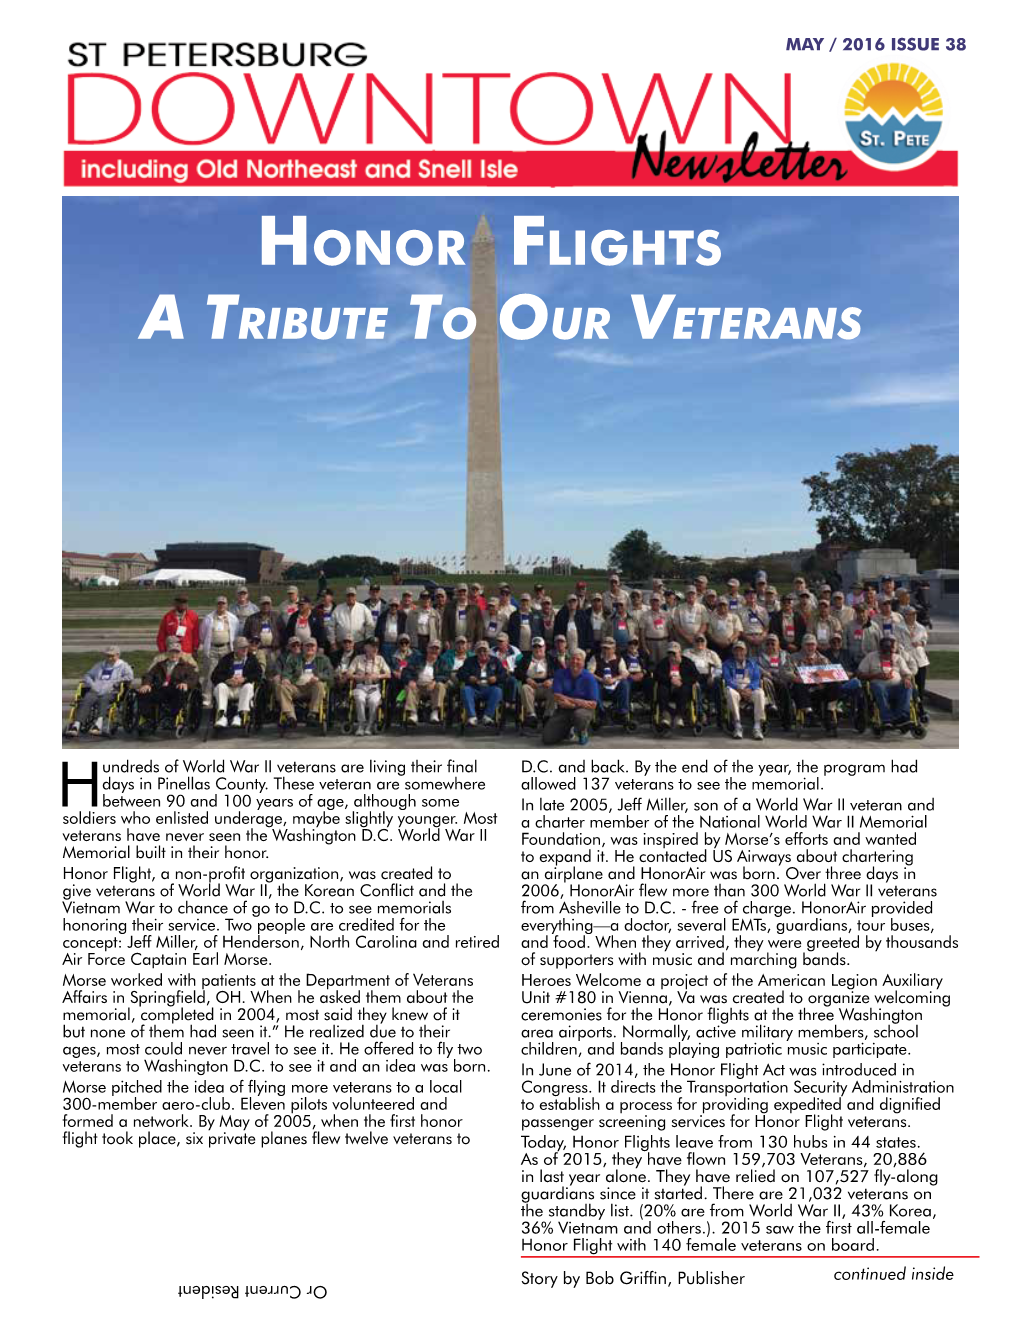 Honor Flights a Tribute to Our Veterans